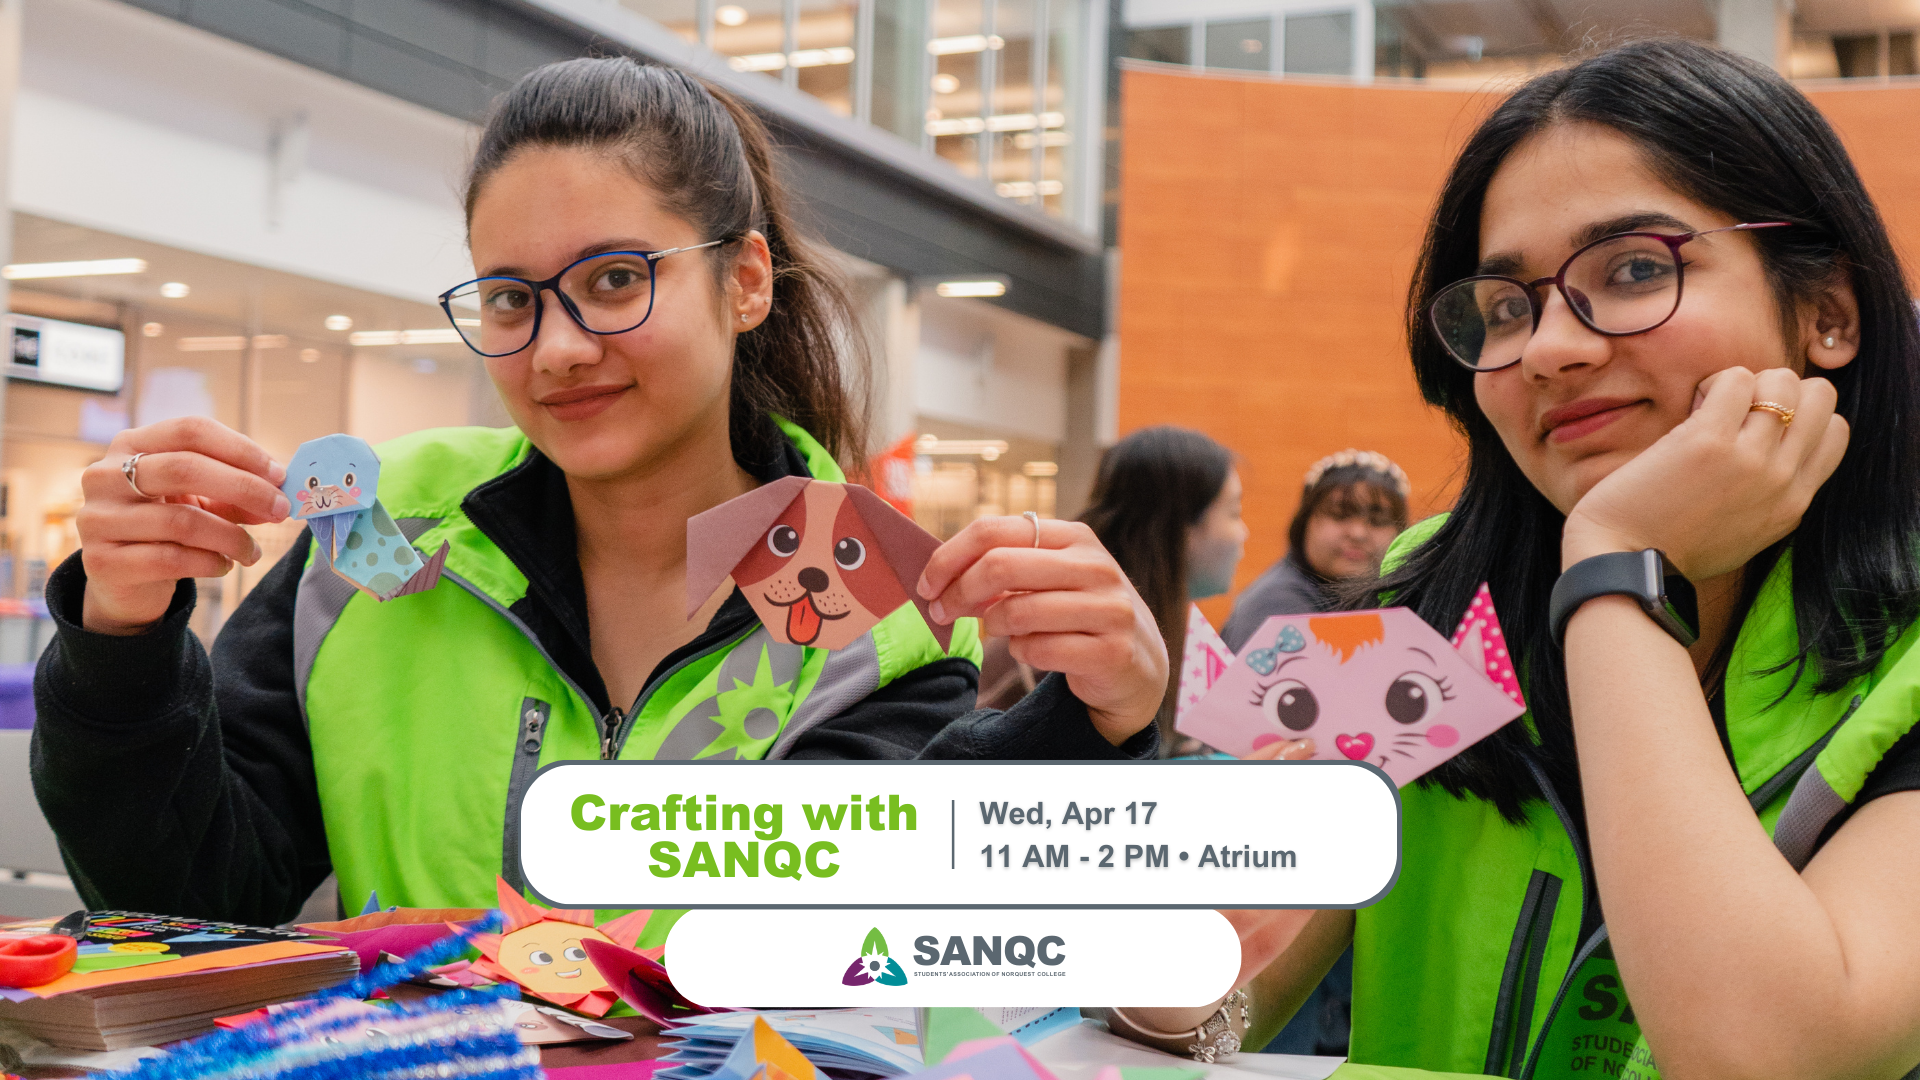 Crafting with SANQC